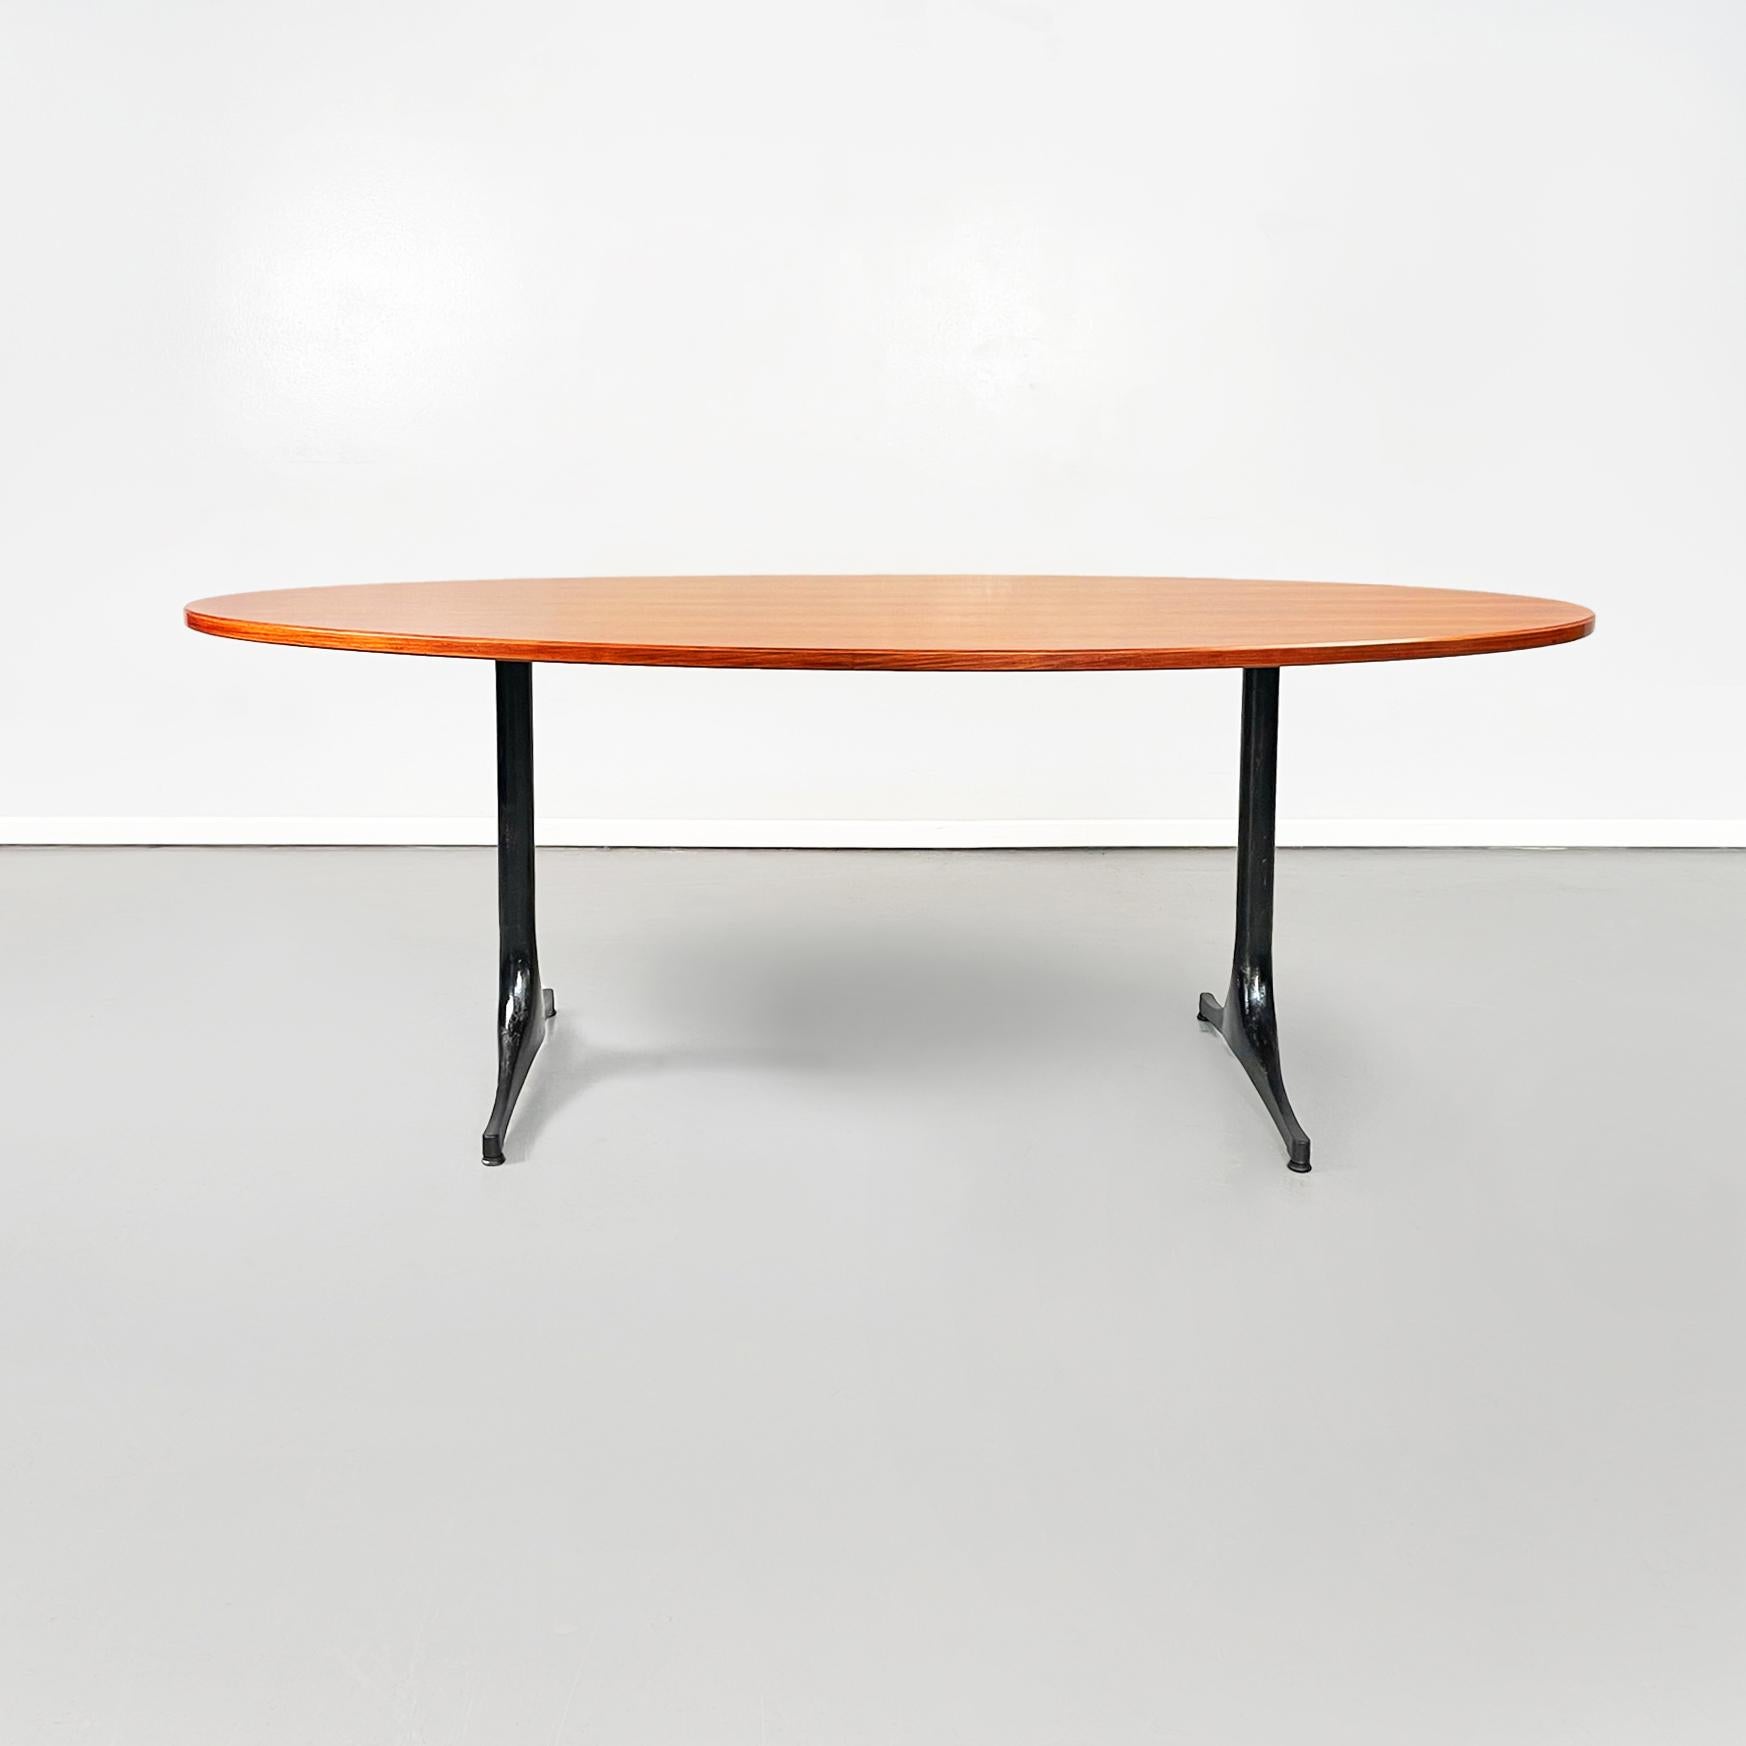 American Modern wood and black metal Dining table by George Nelson for Herman Miller, 1960s
elegant and fantastic dining table with thick oval wooden top. The structure is made up of two legs in black painted metal.
It was produced by Herman